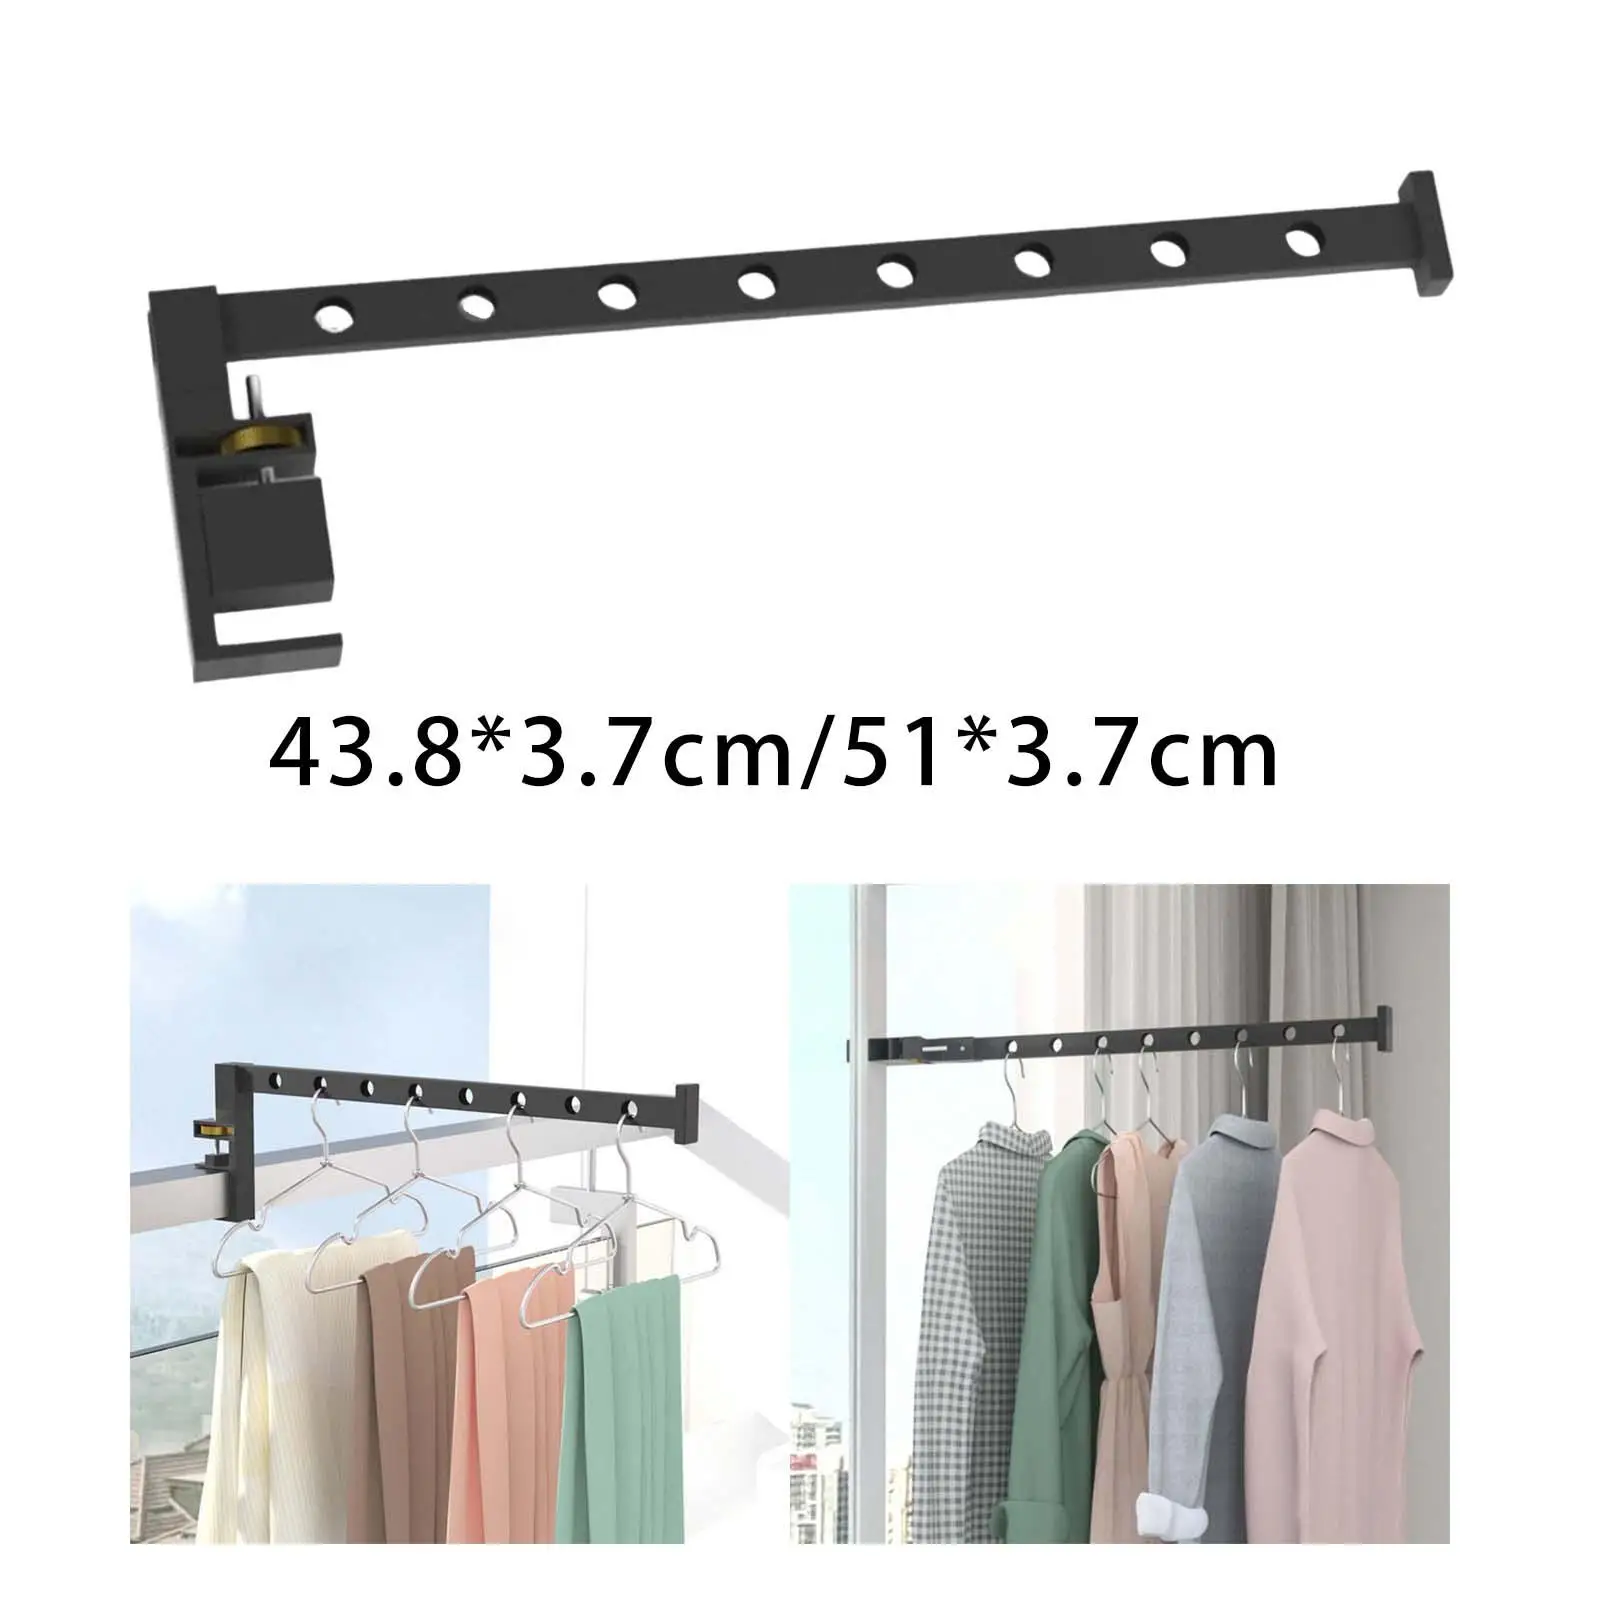 Folding Clothes Hanger Large Space Hooks for Window Wall Bathroom Trousers Shirts